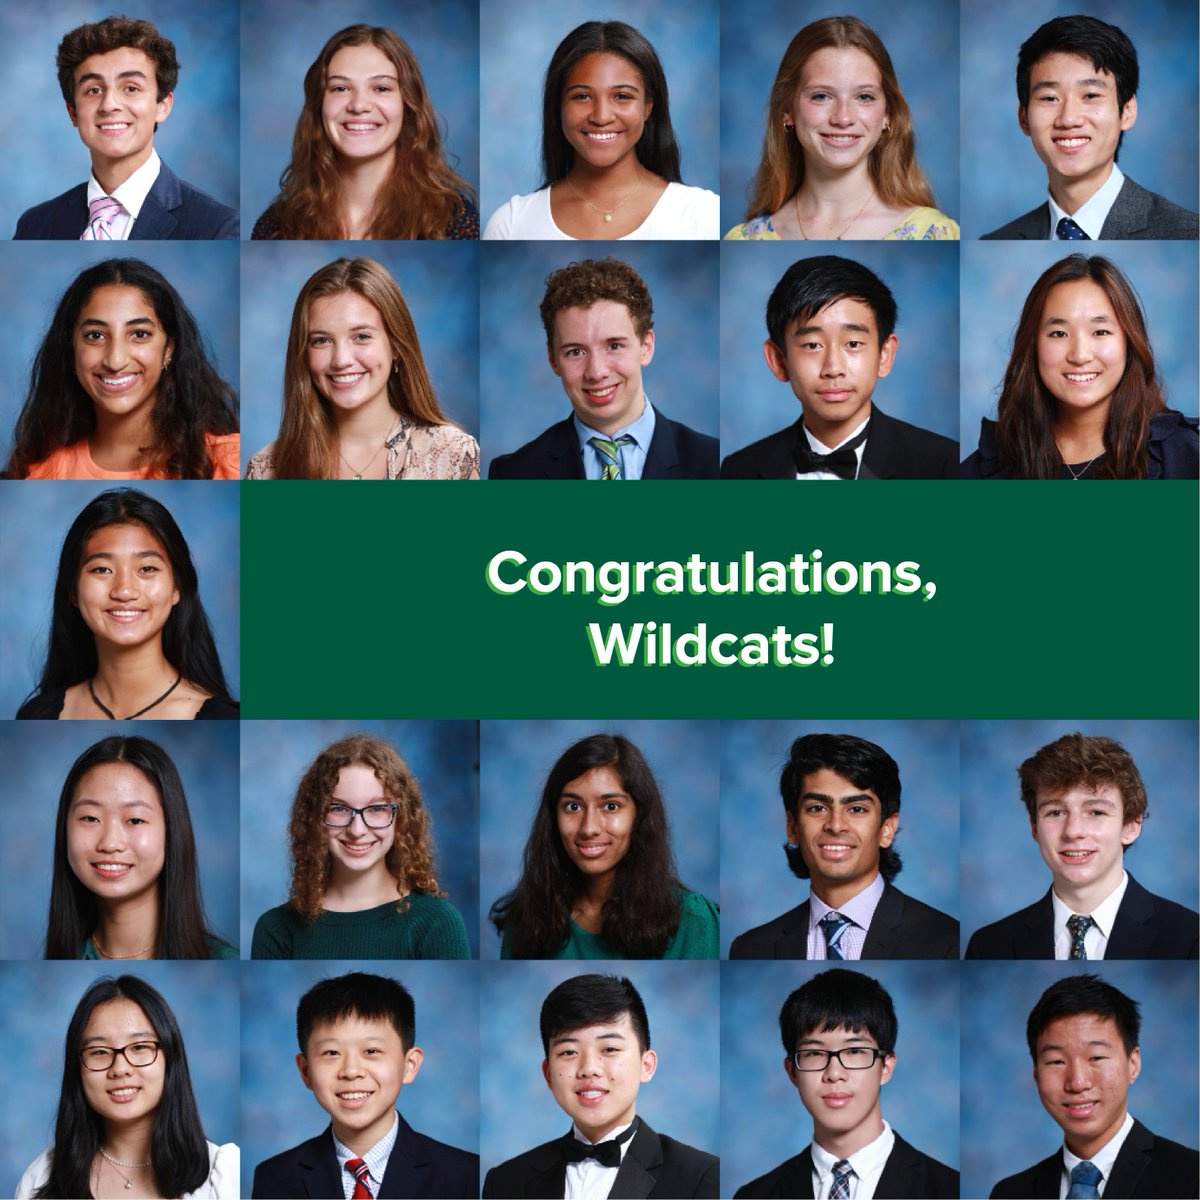 Sixty-eight seniors were recently honored by the National Merit Scholarship Program. Twenty-one were named semifinalists for scholarships and forty-seven students received letters of commendation. Congratulations! Click the link in our bio to read more.